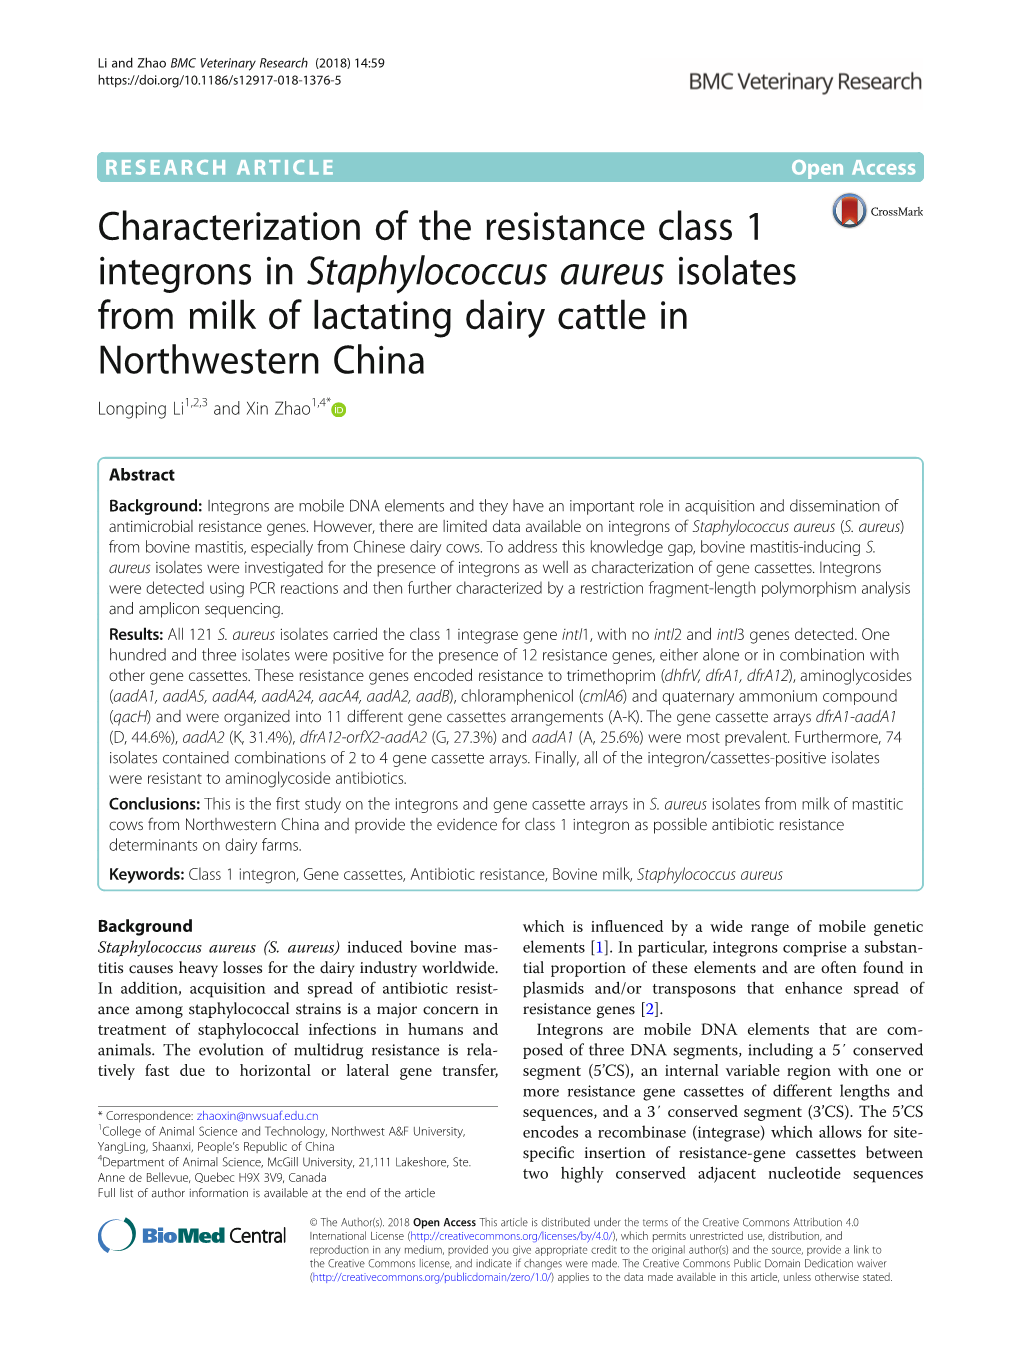 Staphylococcus Aureus Isolates from Milk of Lactating Dairy Cattle in Northwestern China Longping Li1,2,3 and Xin Zhao1,4*